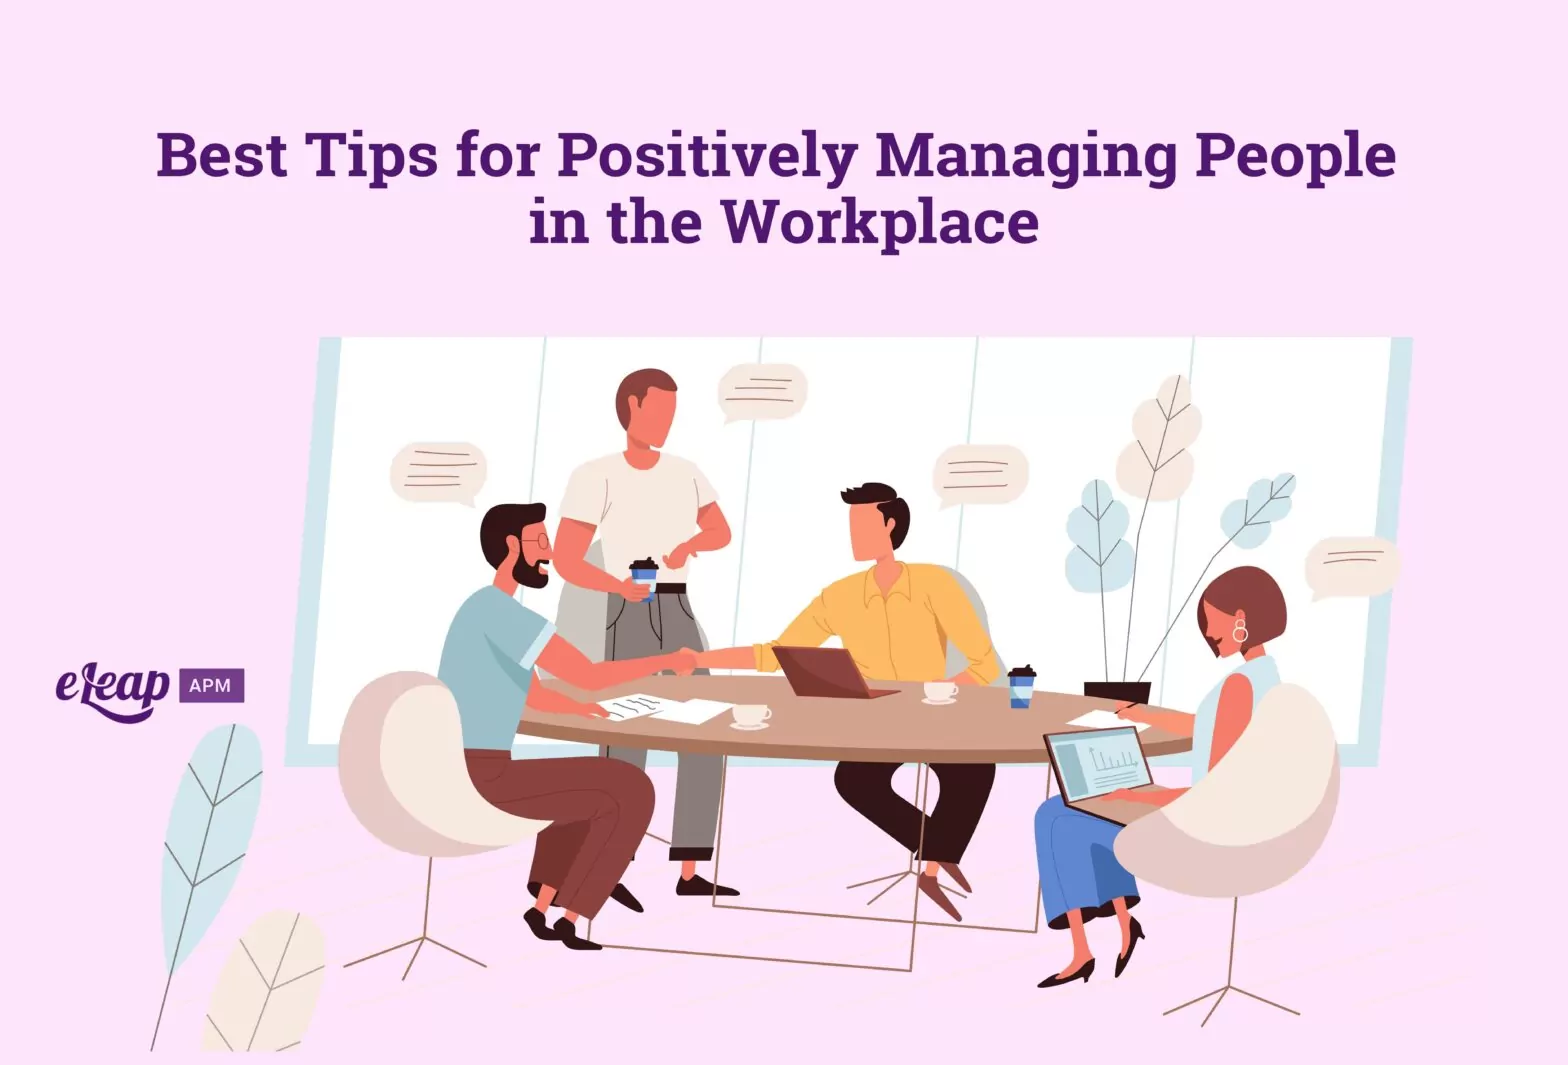 Best Tips for Positively Managing People in the Workplace